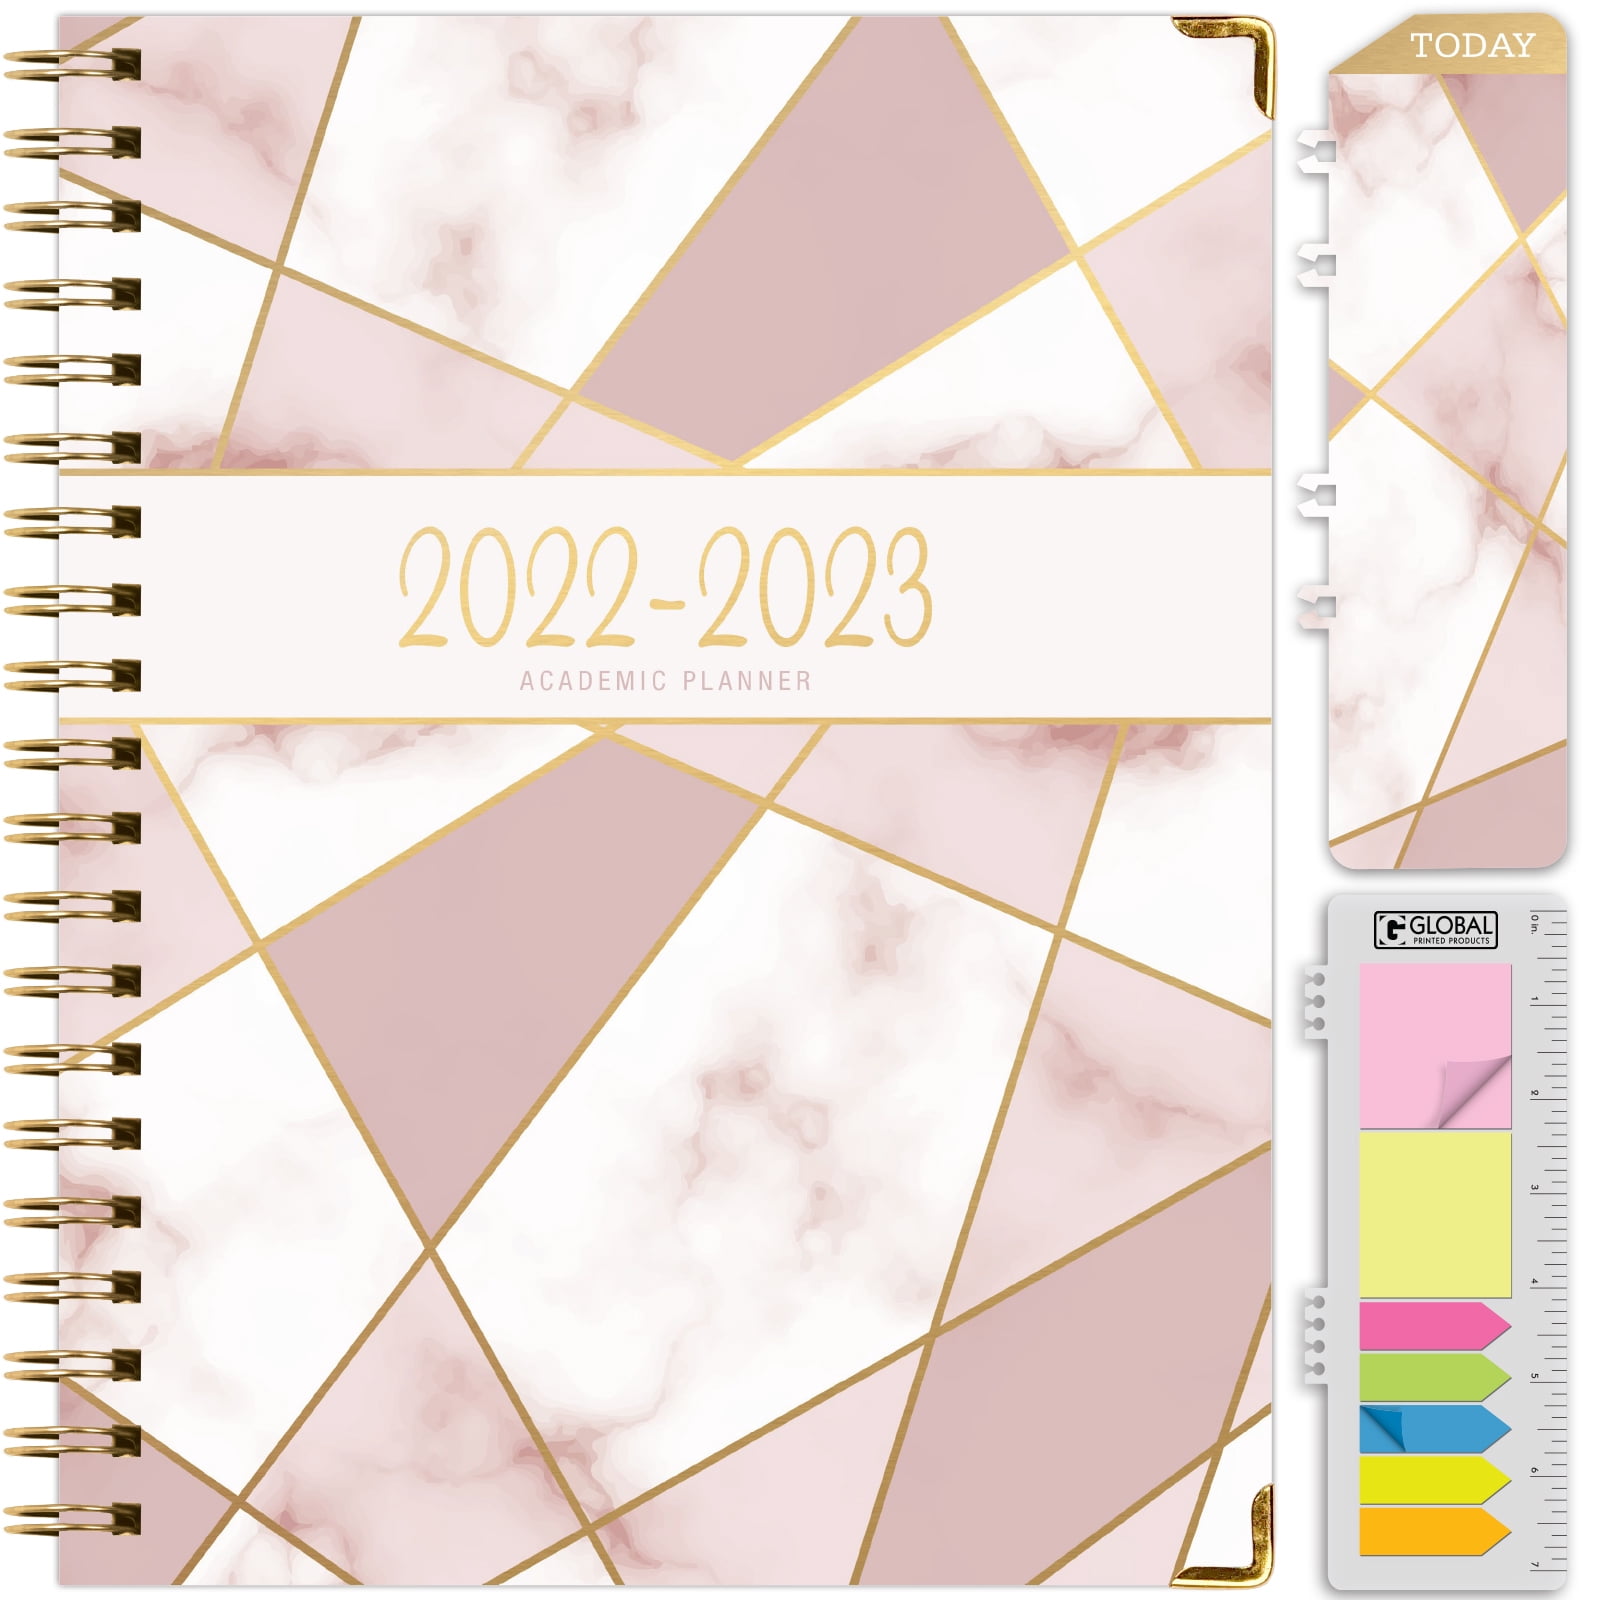 HARDCOVER Academic Year 2022-2023 Planner: Pocket Folder and Sticky Note Set June 2022 Through July 2023 Bookmark 5.5x8 Daily Weekly Monthly Planner Yearly Agenda Blue Bloom 